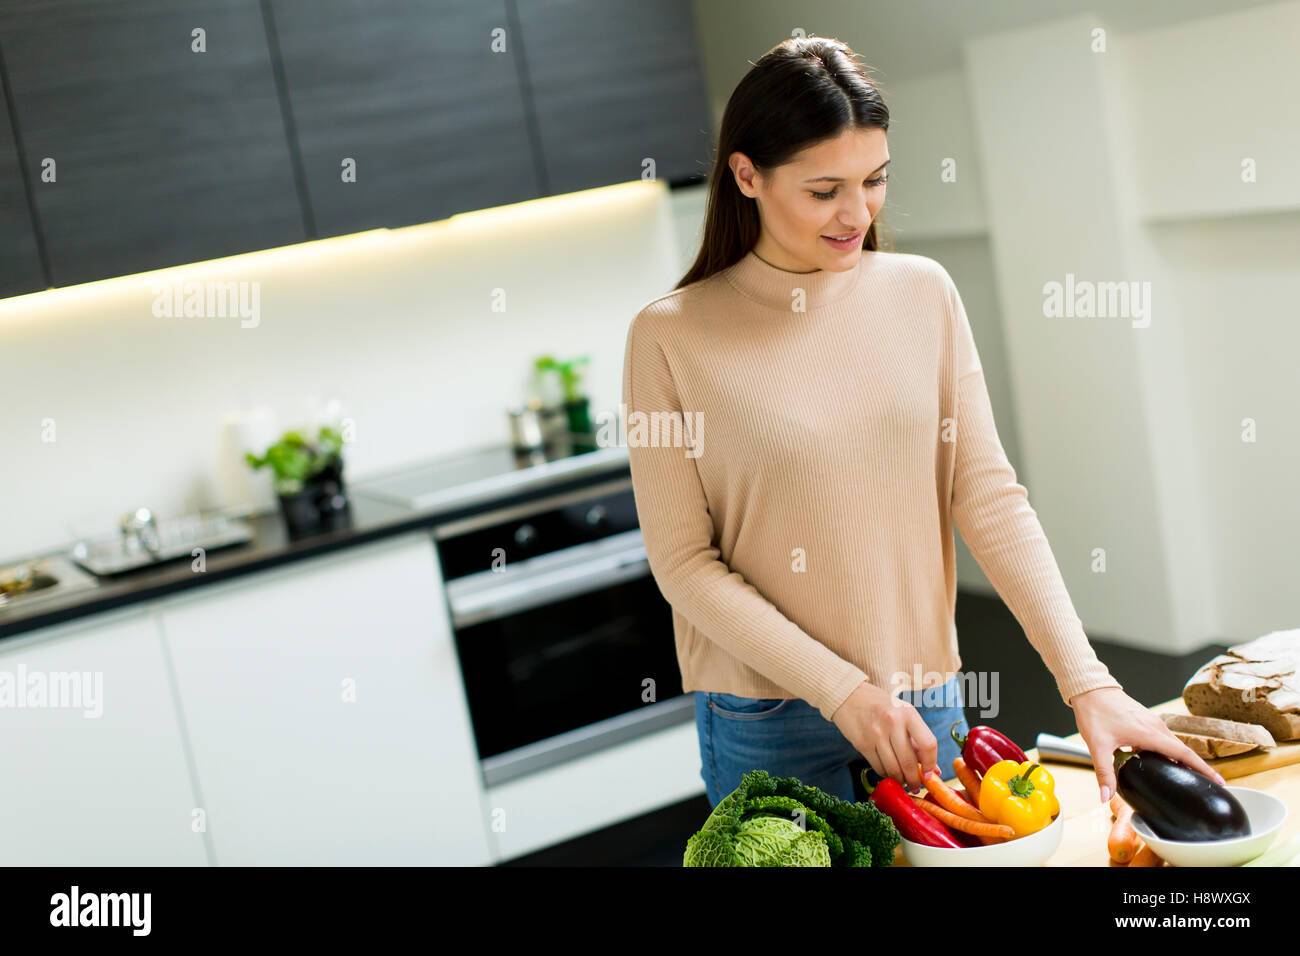 Pretty young woman preparing food in the modern kitchen Stock Photo